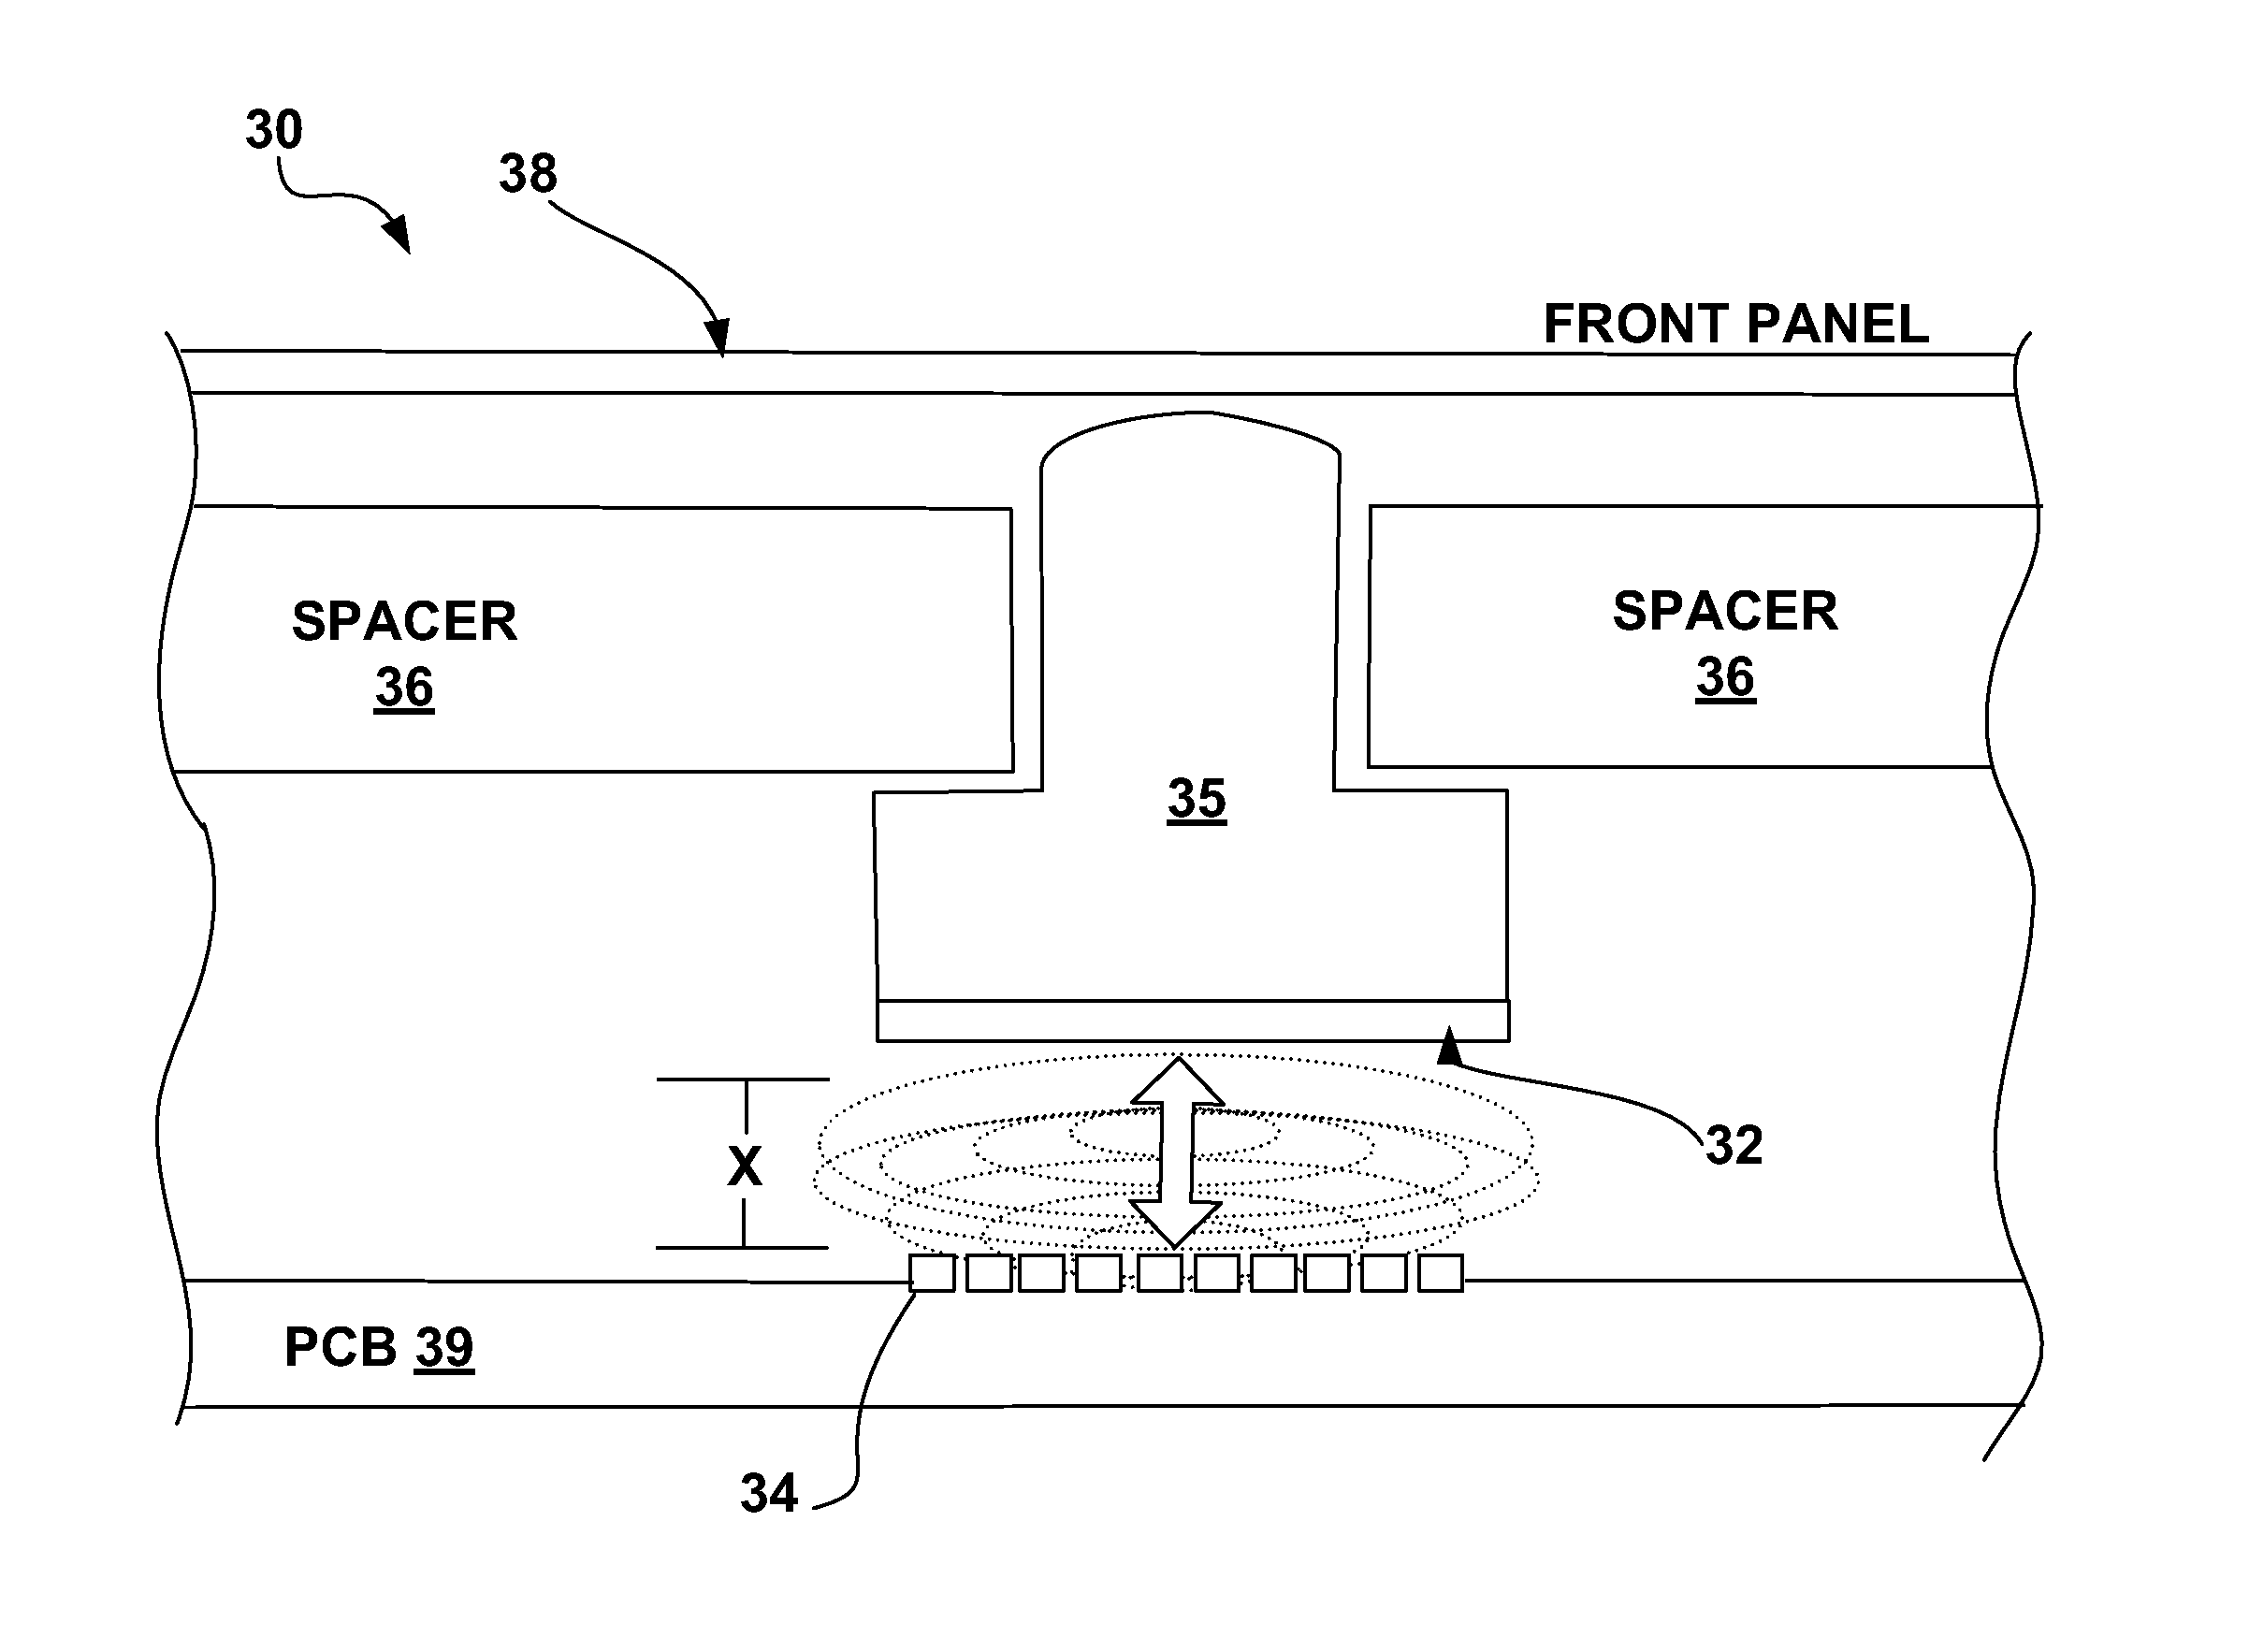 Inductive touch key switch system including a deflection translation mechanism